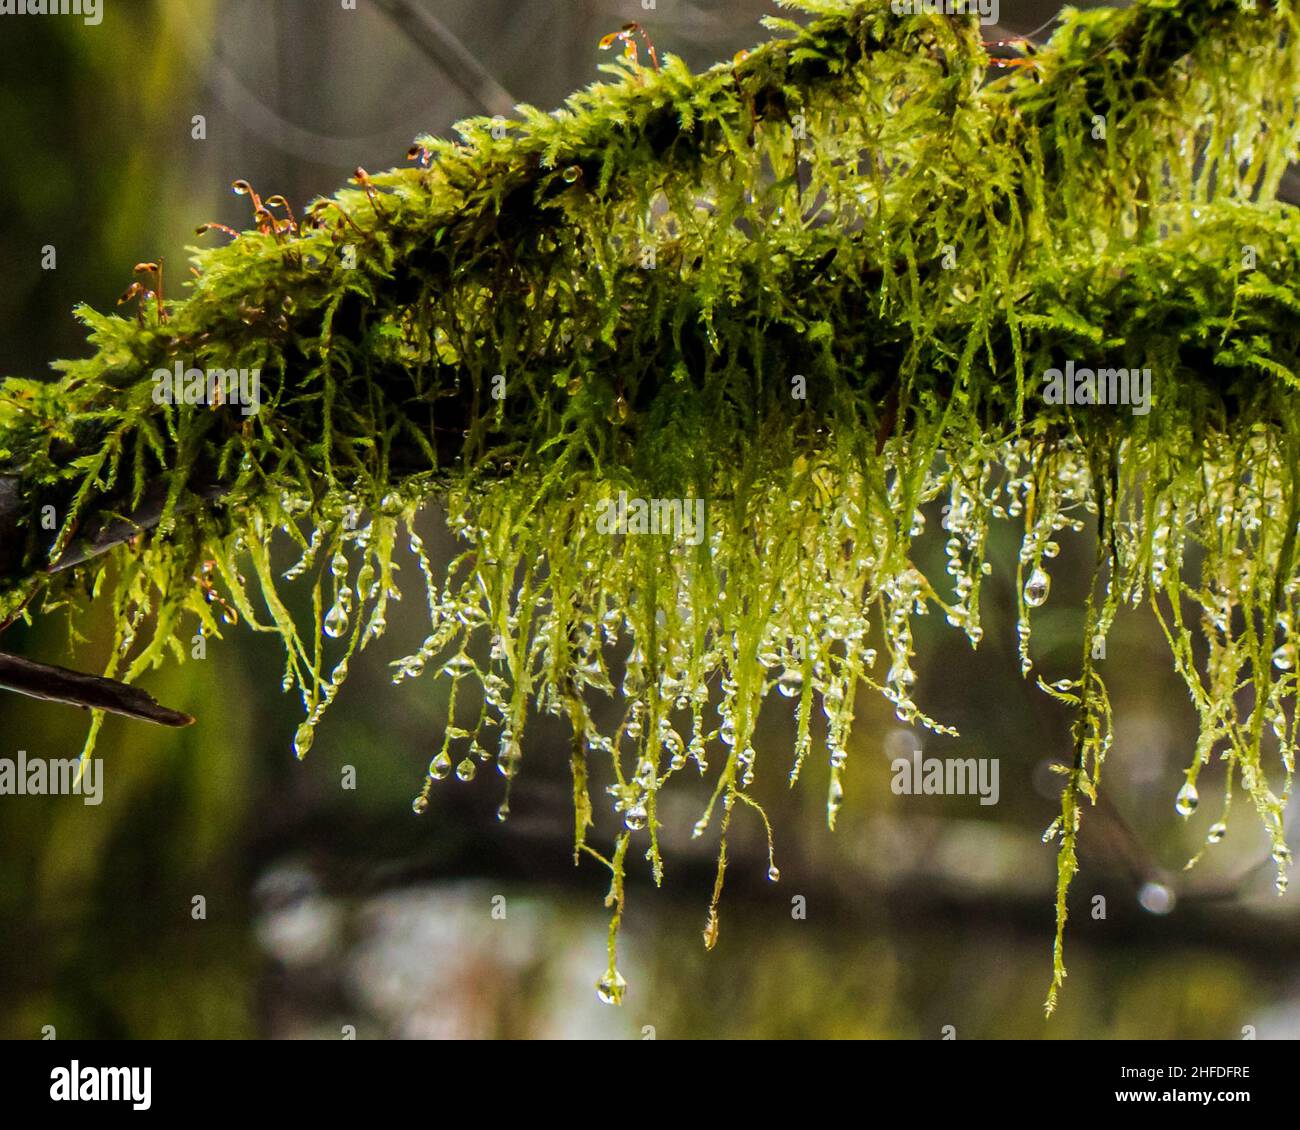 Early spring, British Columbia rainforest, green moss hanging from a branch, with raindrops. Stock Photo